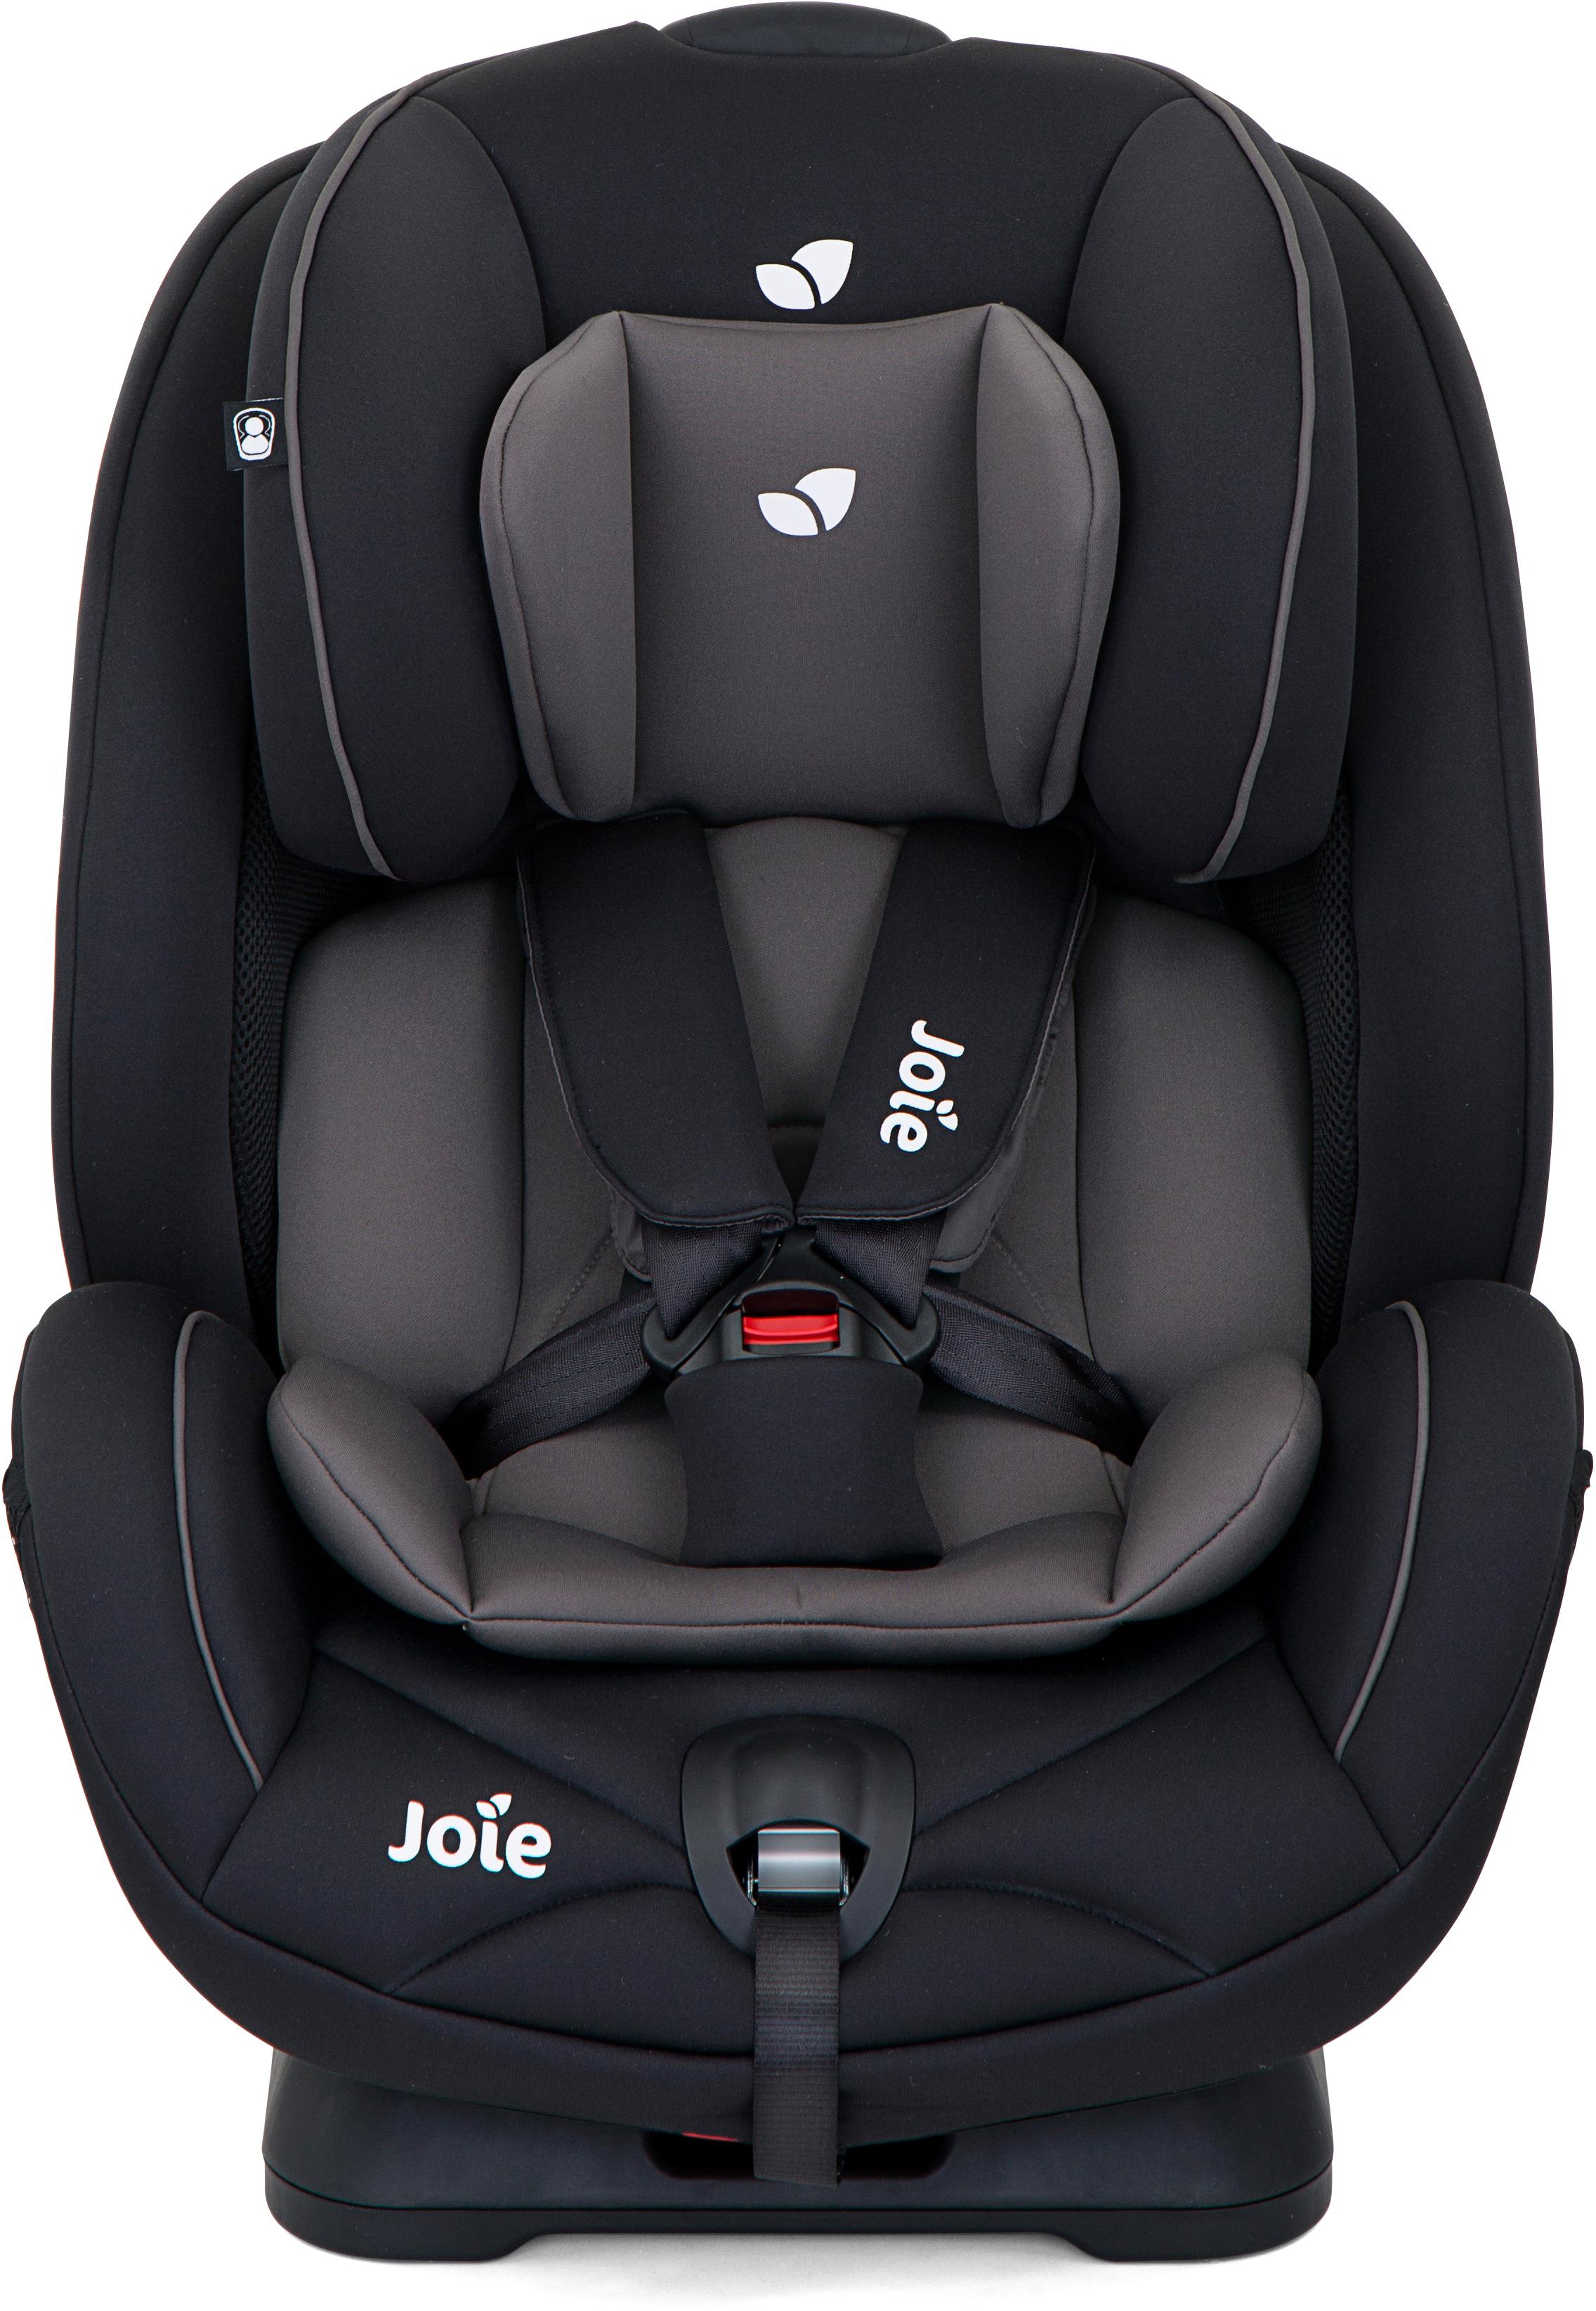 Joie Stages Group 0+/1/2 Child Car Seat - Coal